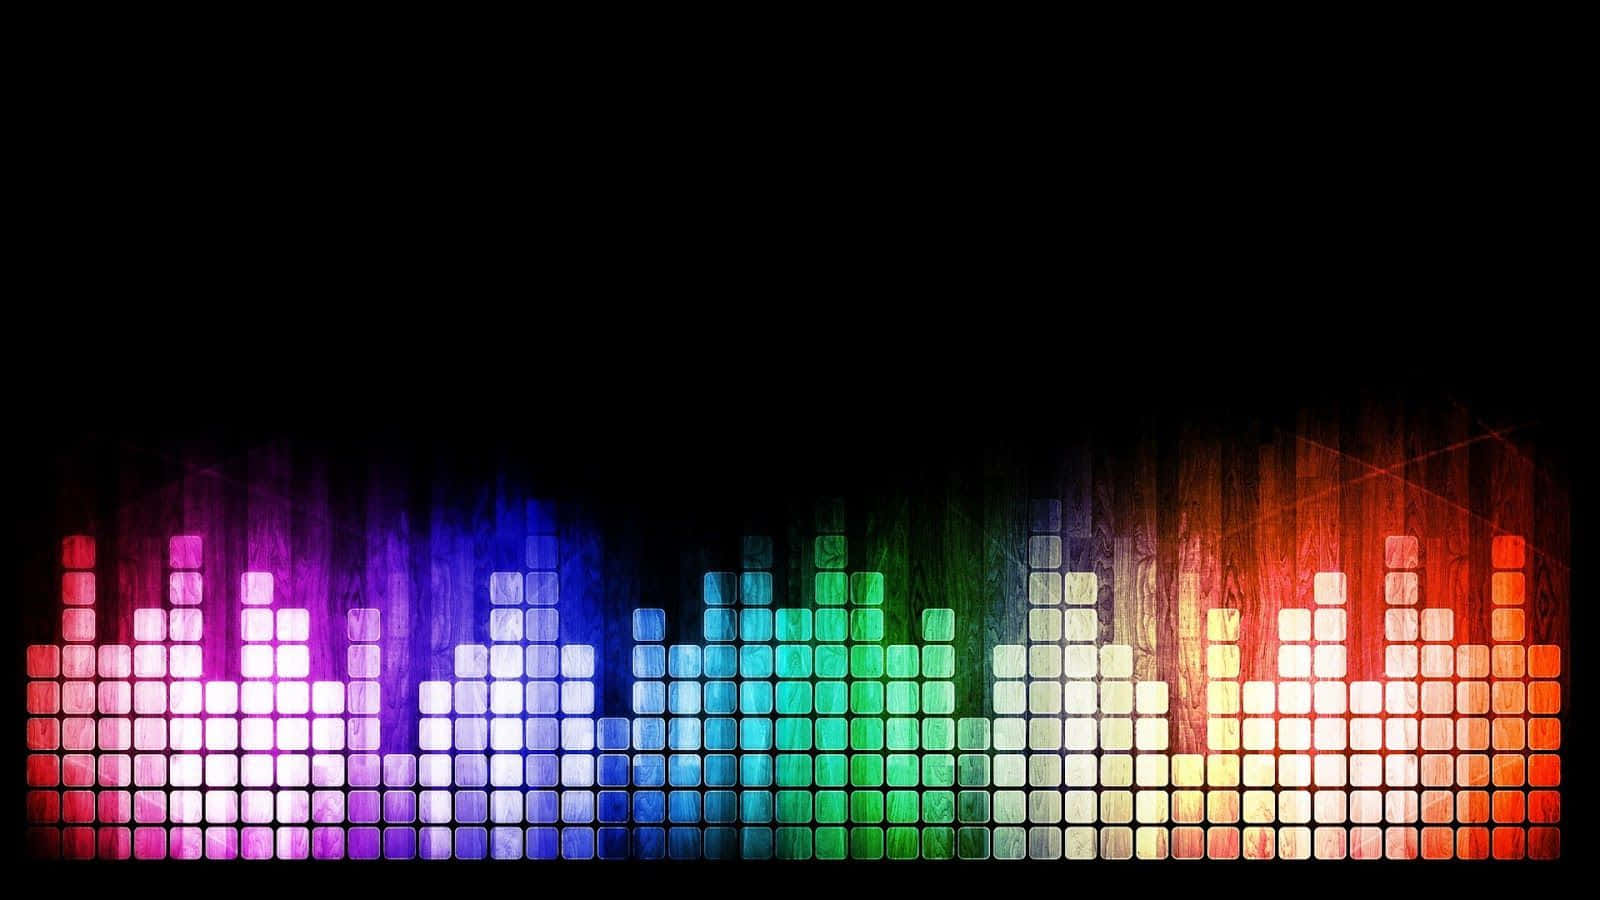 Dance the night away to the latest EDM tracks Wallpaper